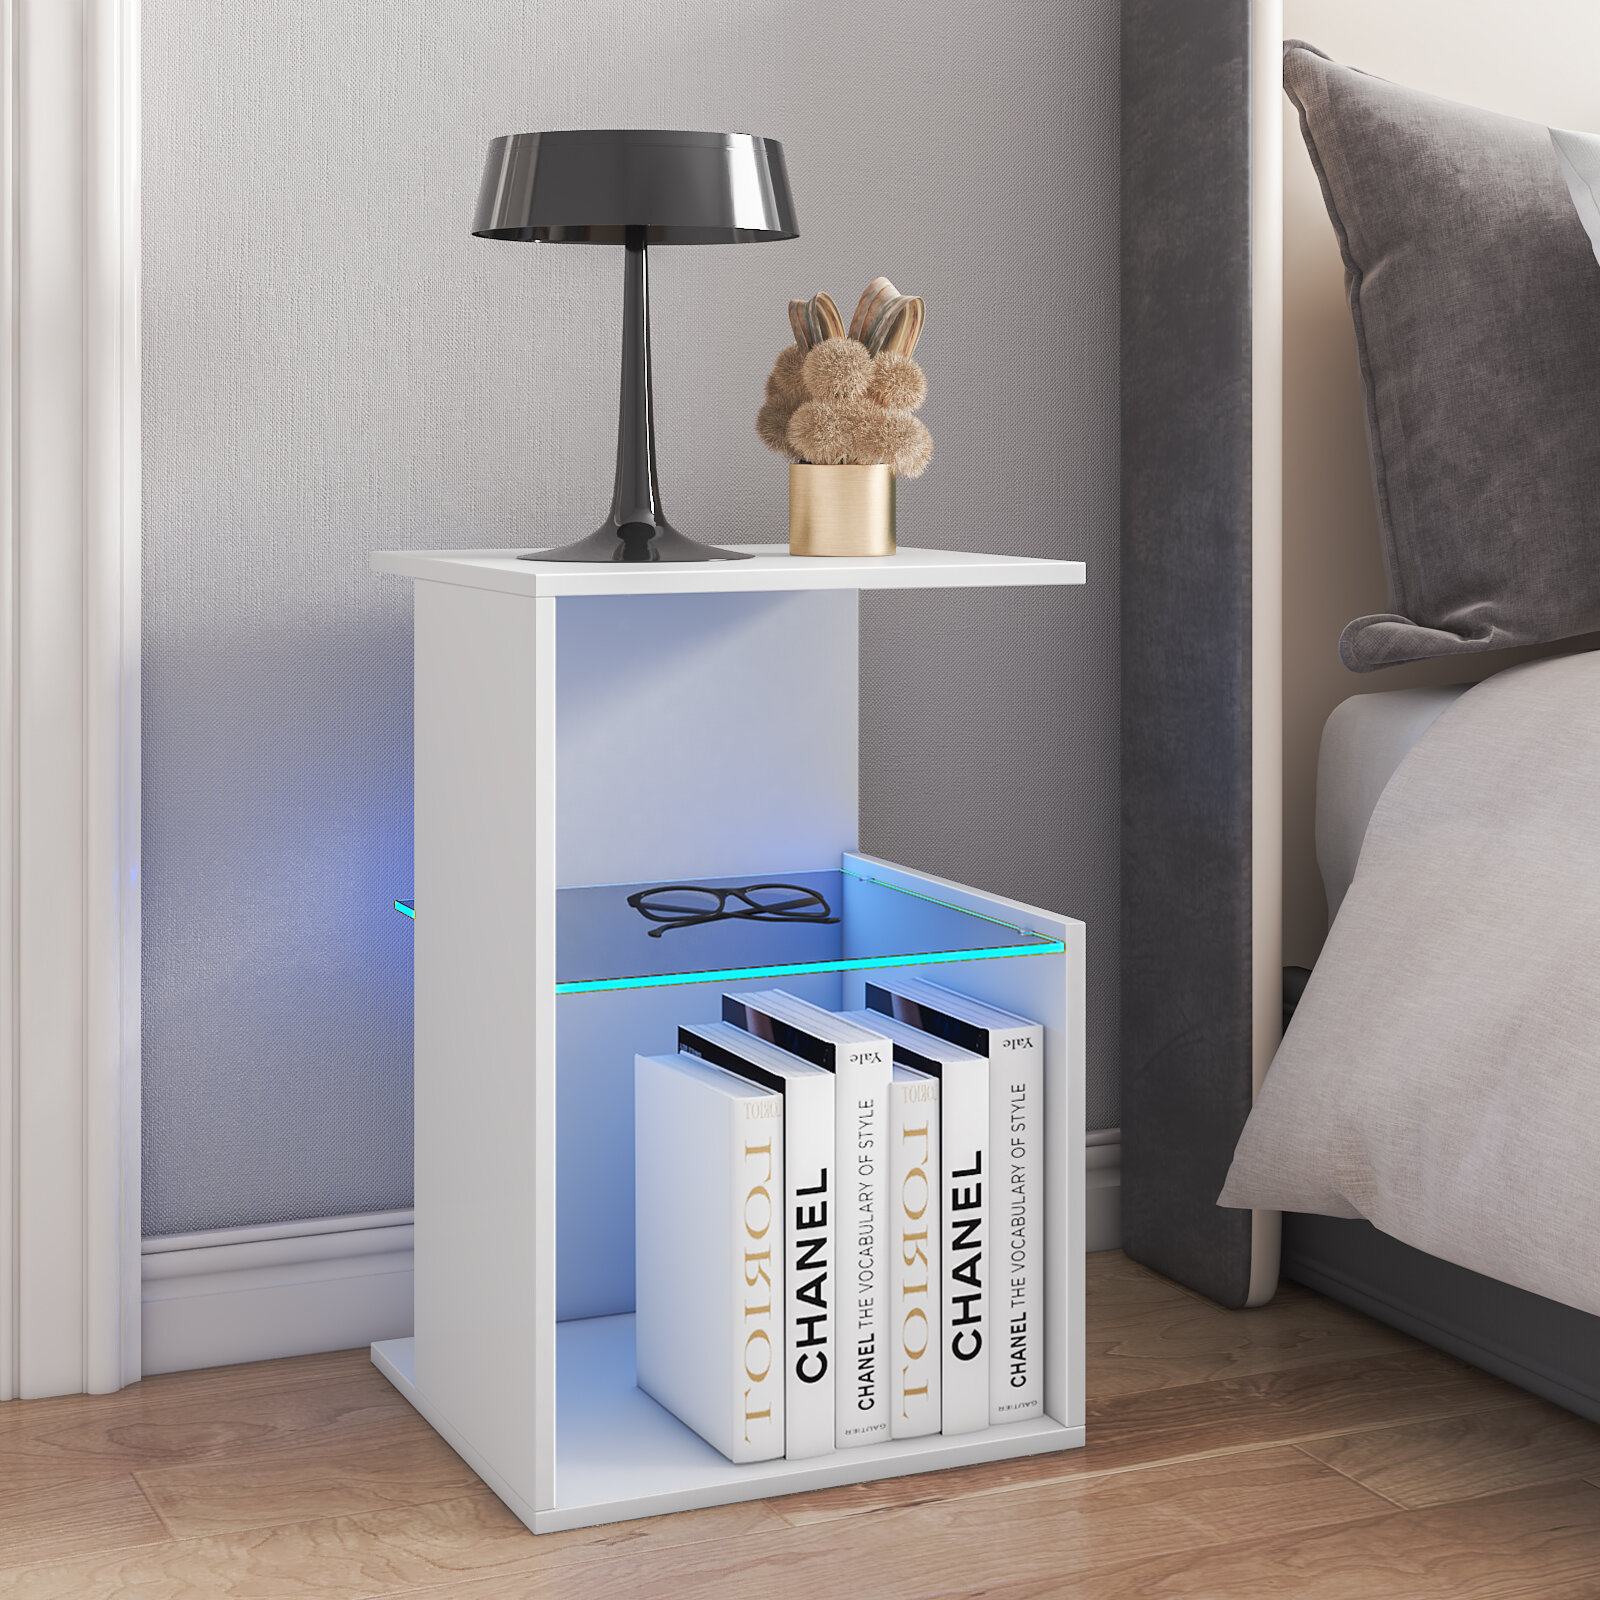 Image of Hommpa Led Nightstand Modern Led Bedside Table with Glass Shelf 3 Layer Led End Table for Bedroom Living Room